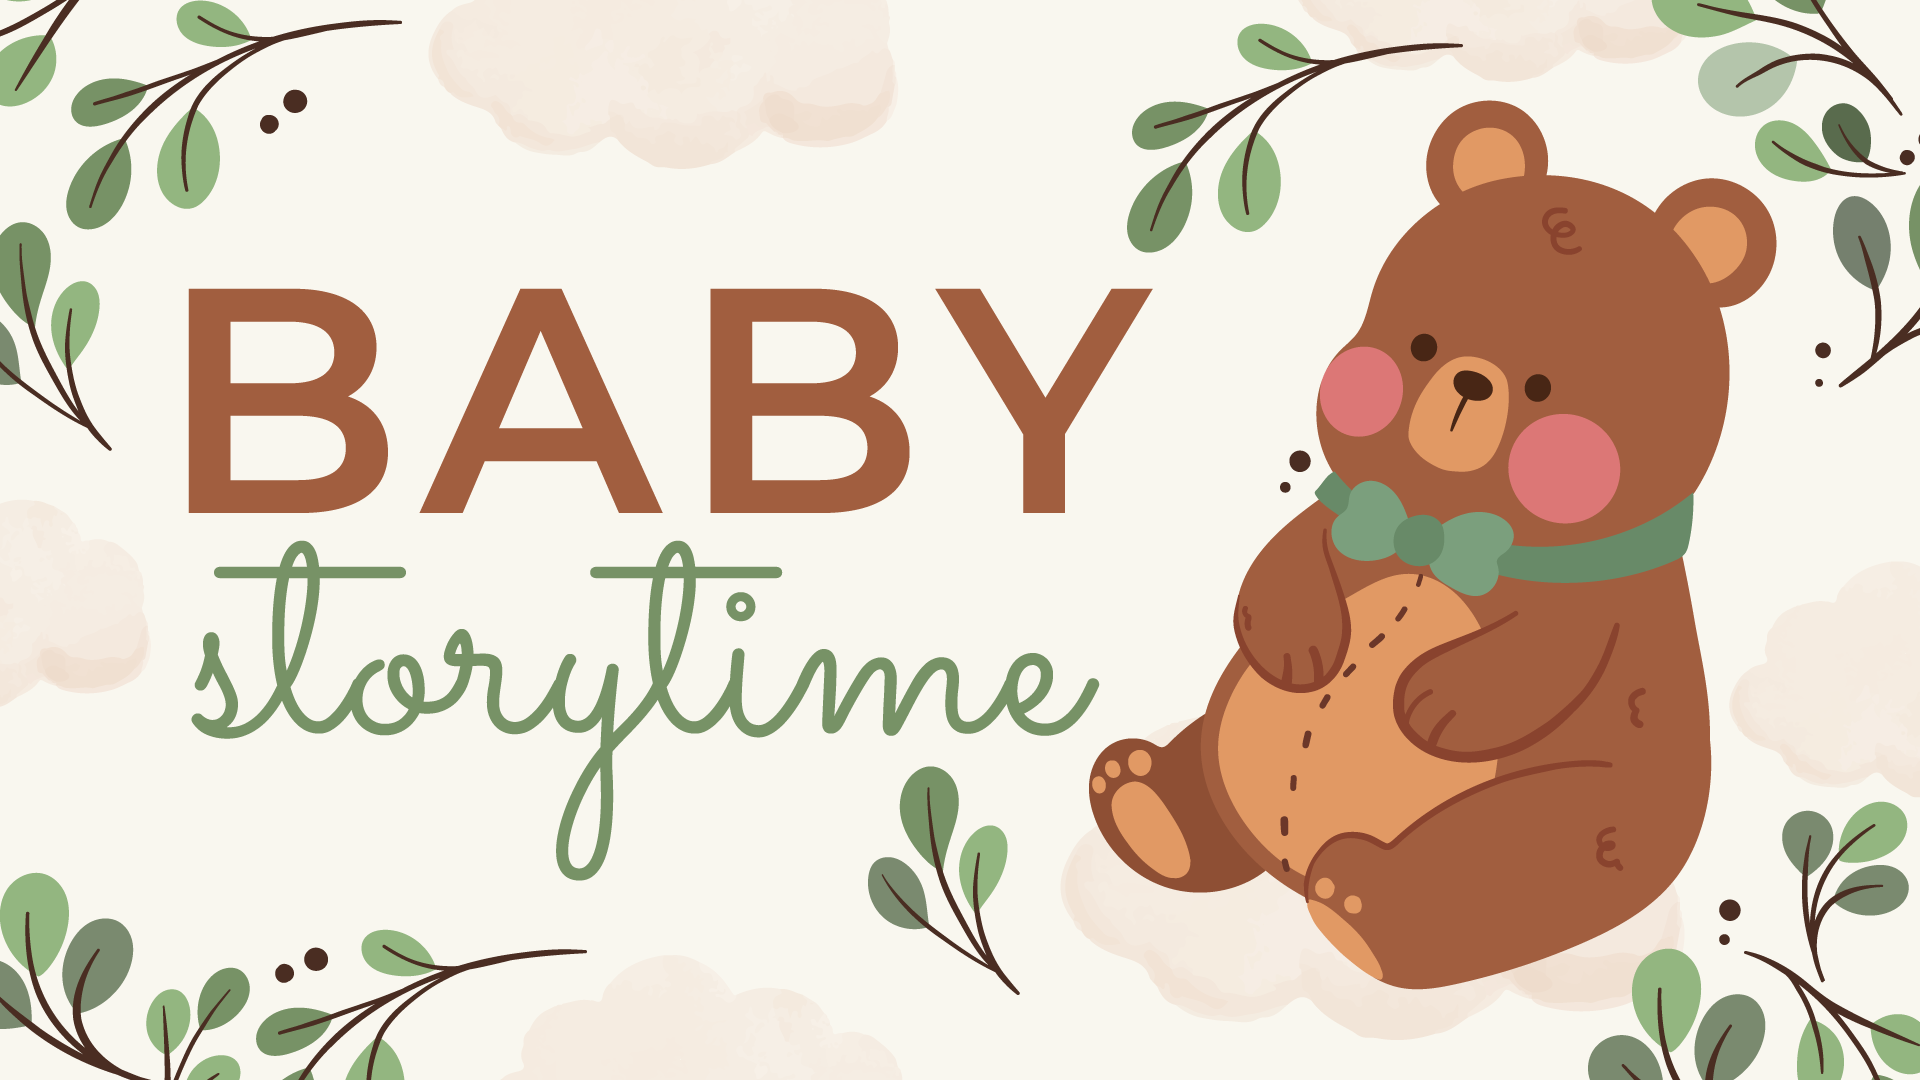 event banner: baby storytime